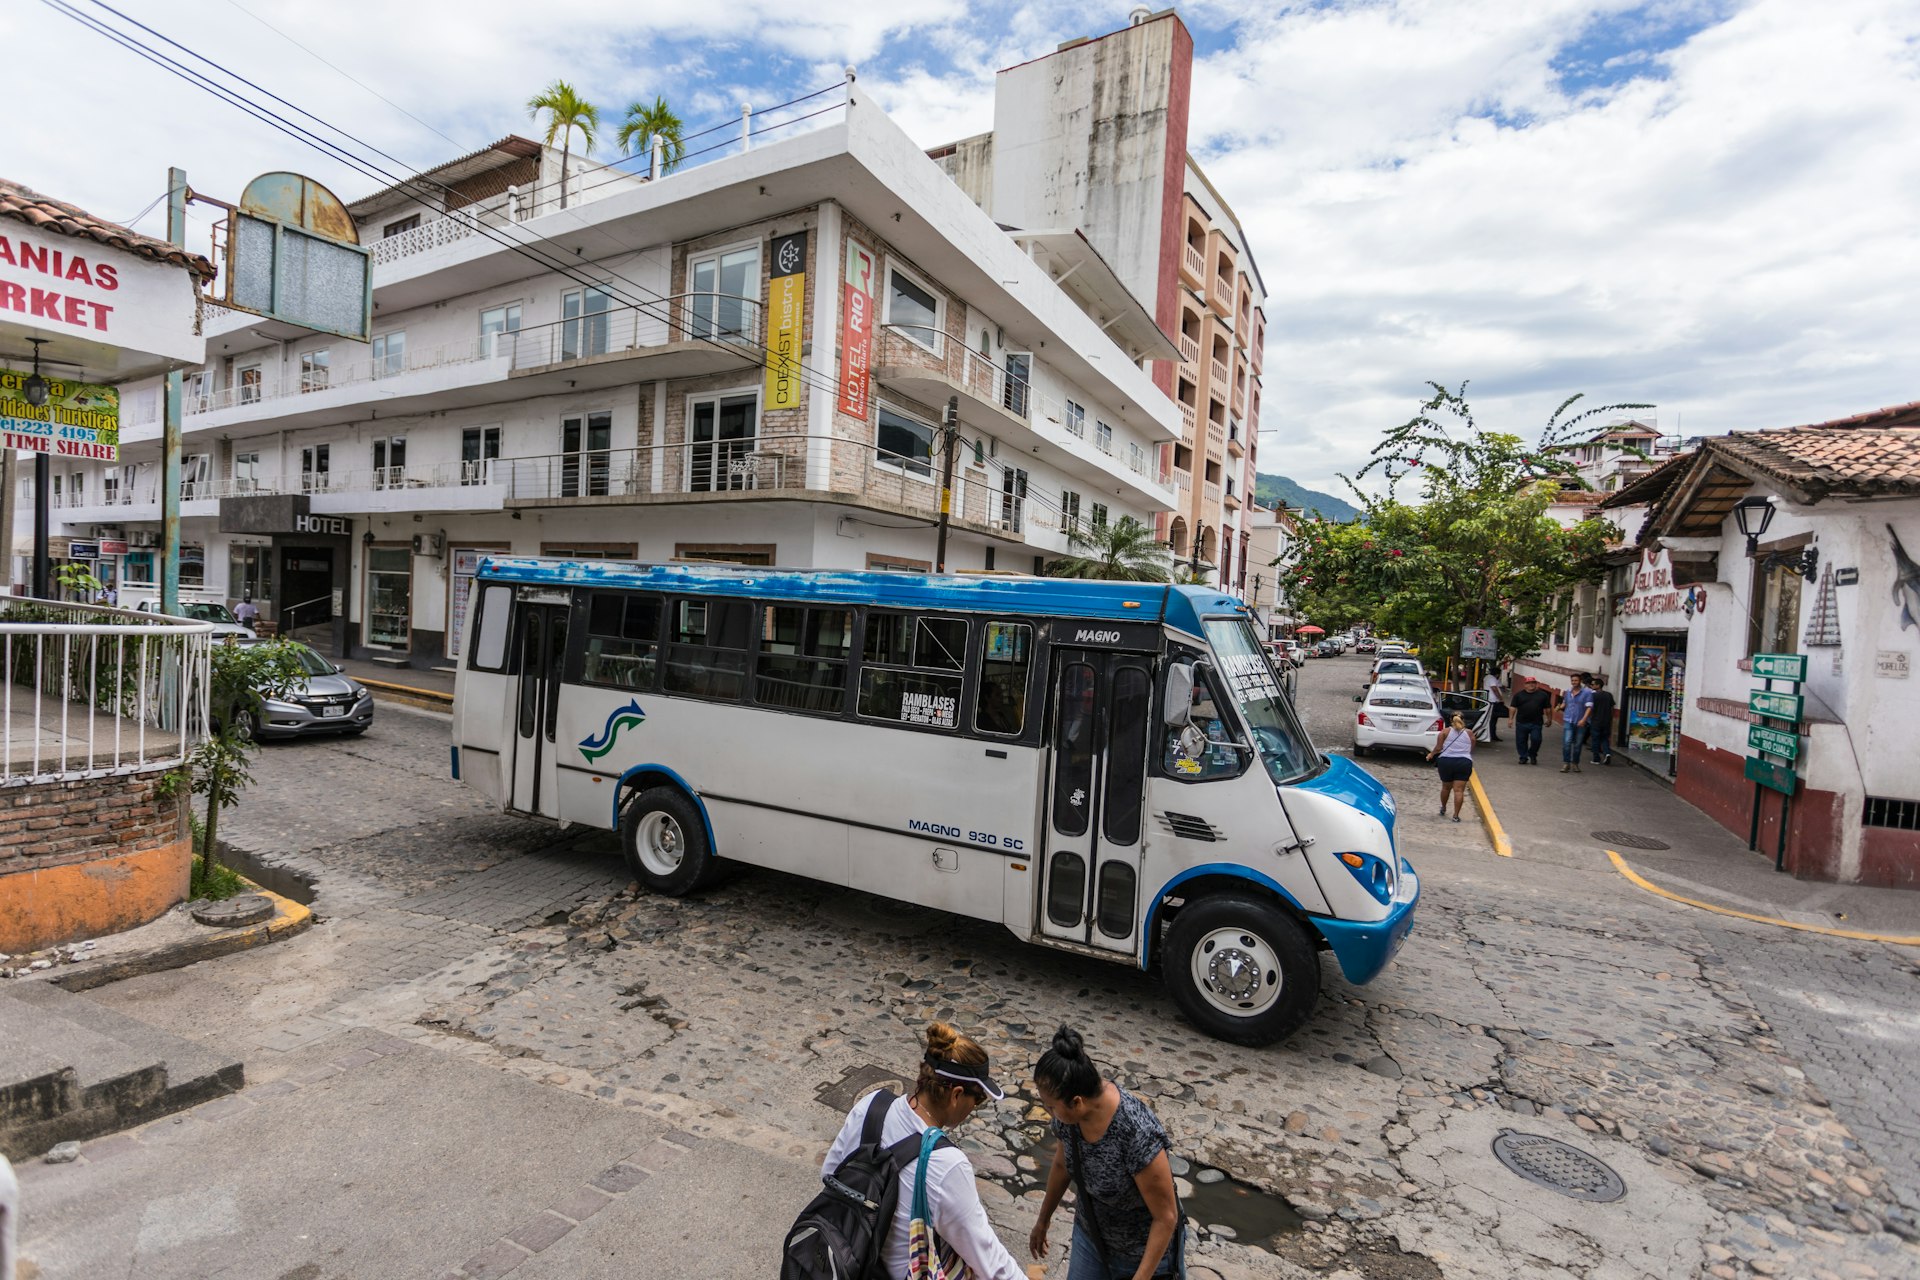 A public bus driving through the downtown district of Puerto Vallarta